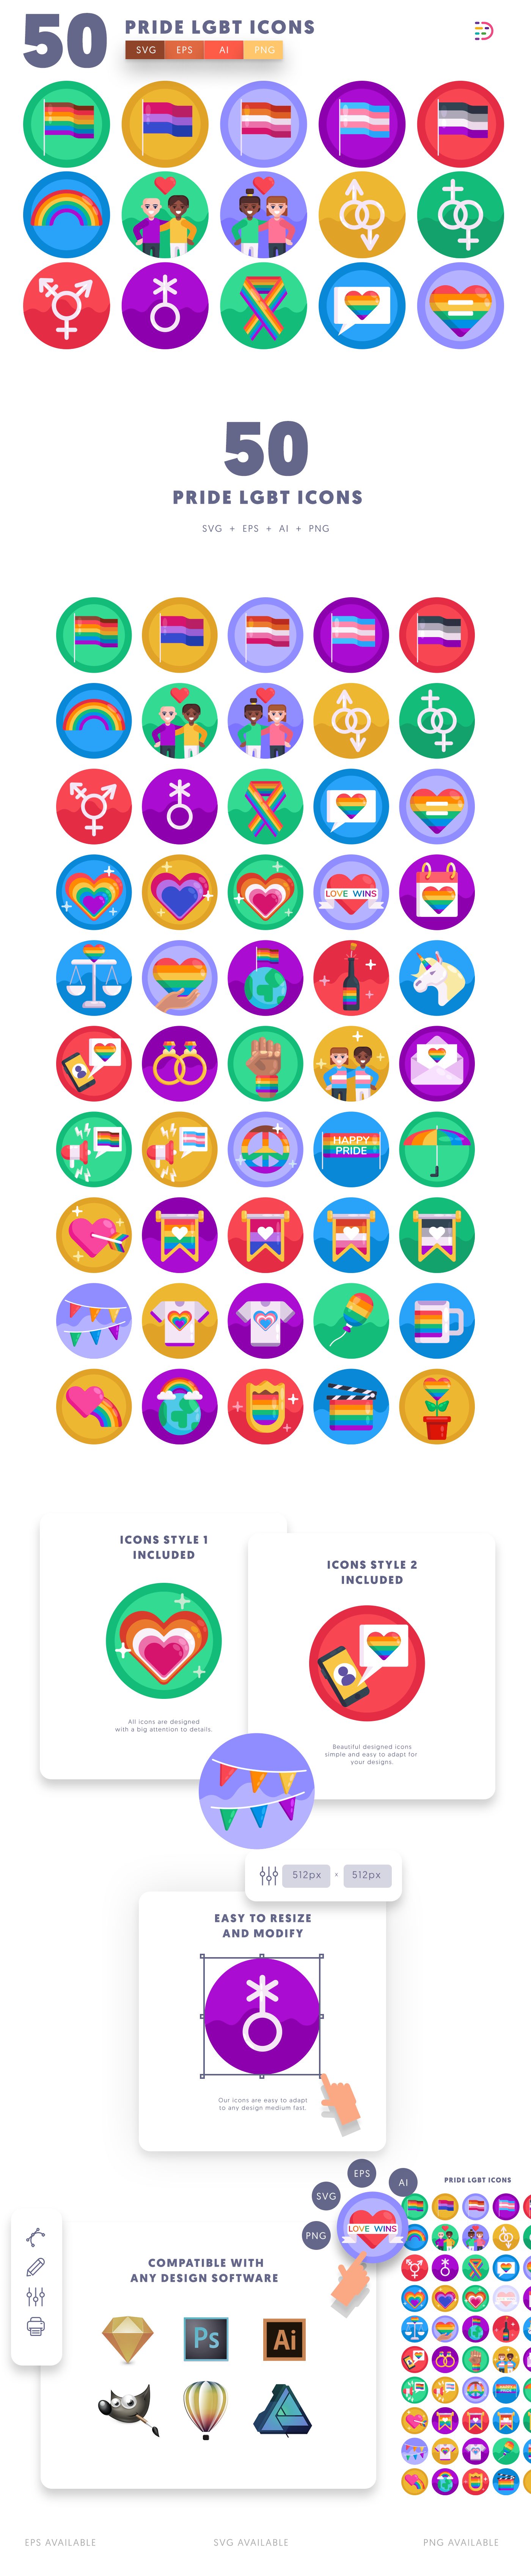 Editable pride lgbt icons icon pack, easy to edit and customize icons